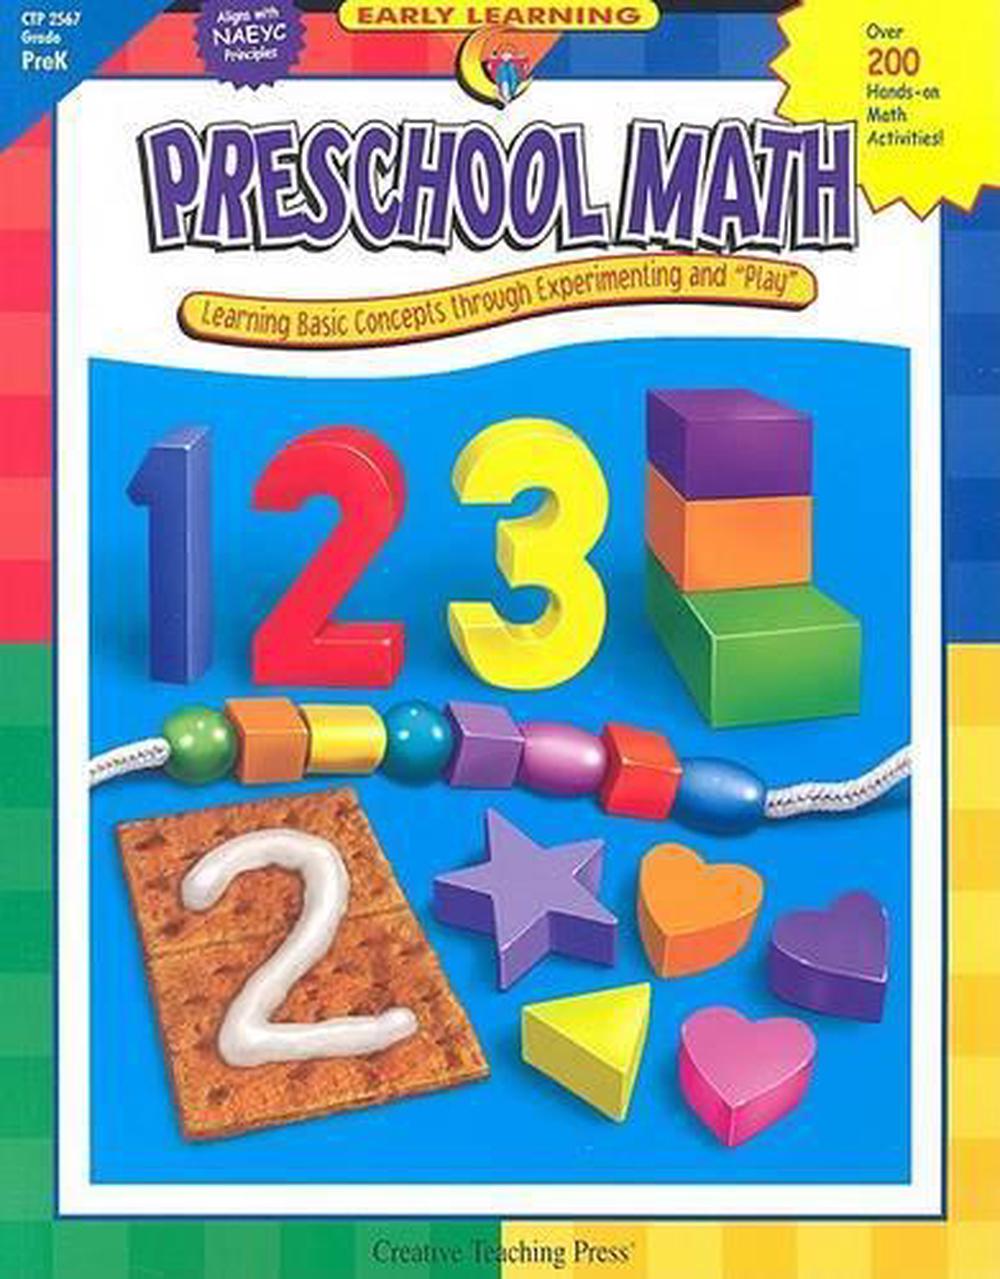 preschool-math-learning-basic-concepts-through-experimenting-and-play